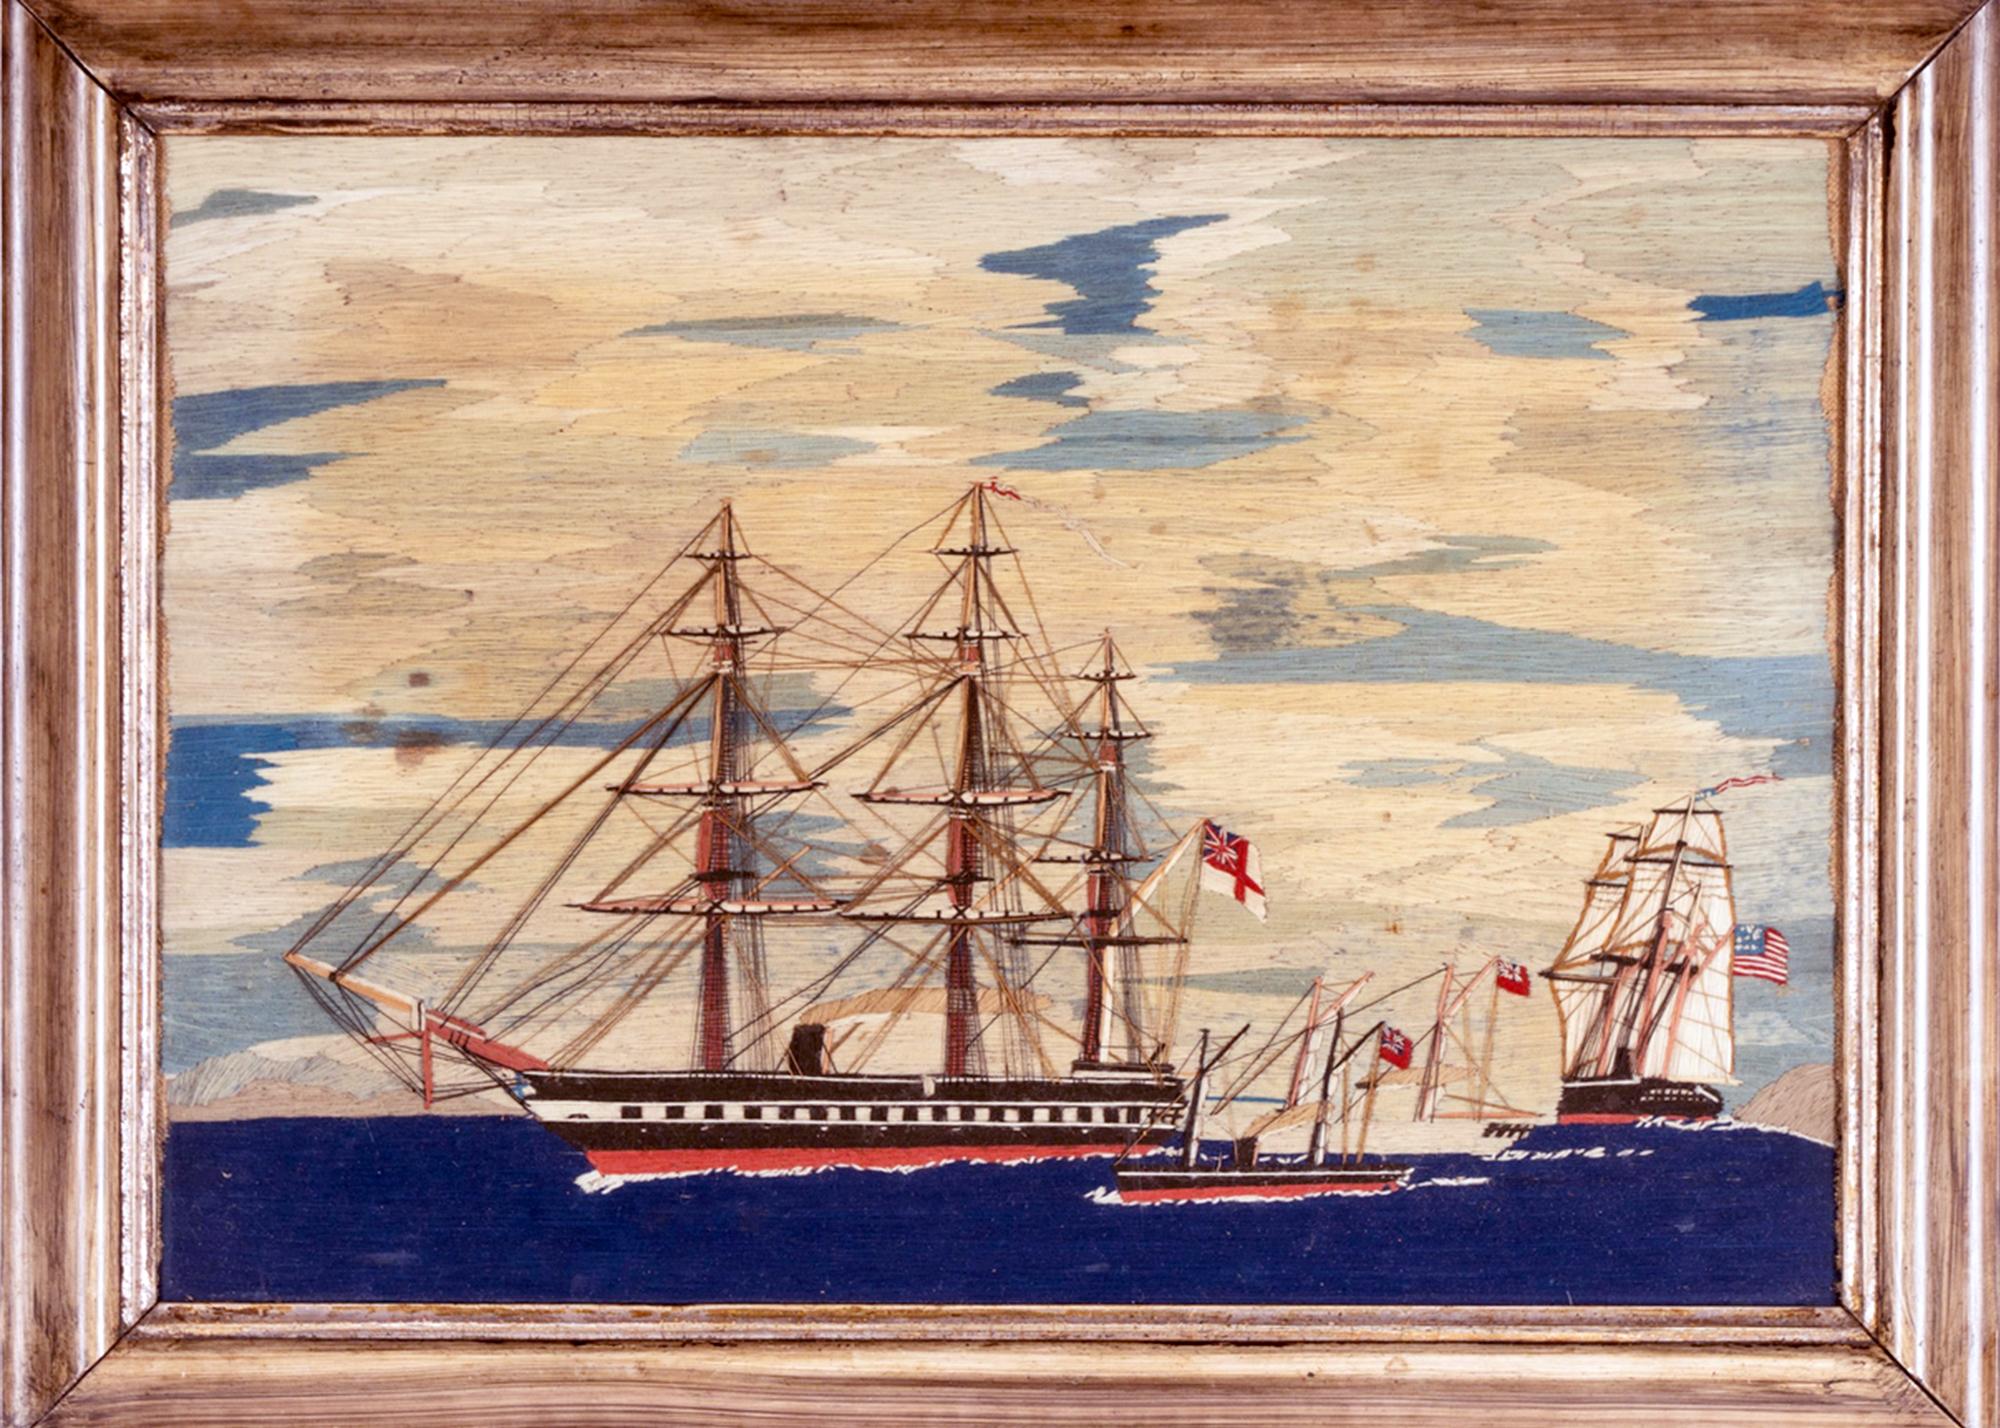 British Sailor's Woolwork with Four Ships including an American Ship,
Circa 1875

The sailor's woolwork depicts the port side view of four ships including an American ship under a cloudy sky.   In the center is a British Royal Navy ship flying the